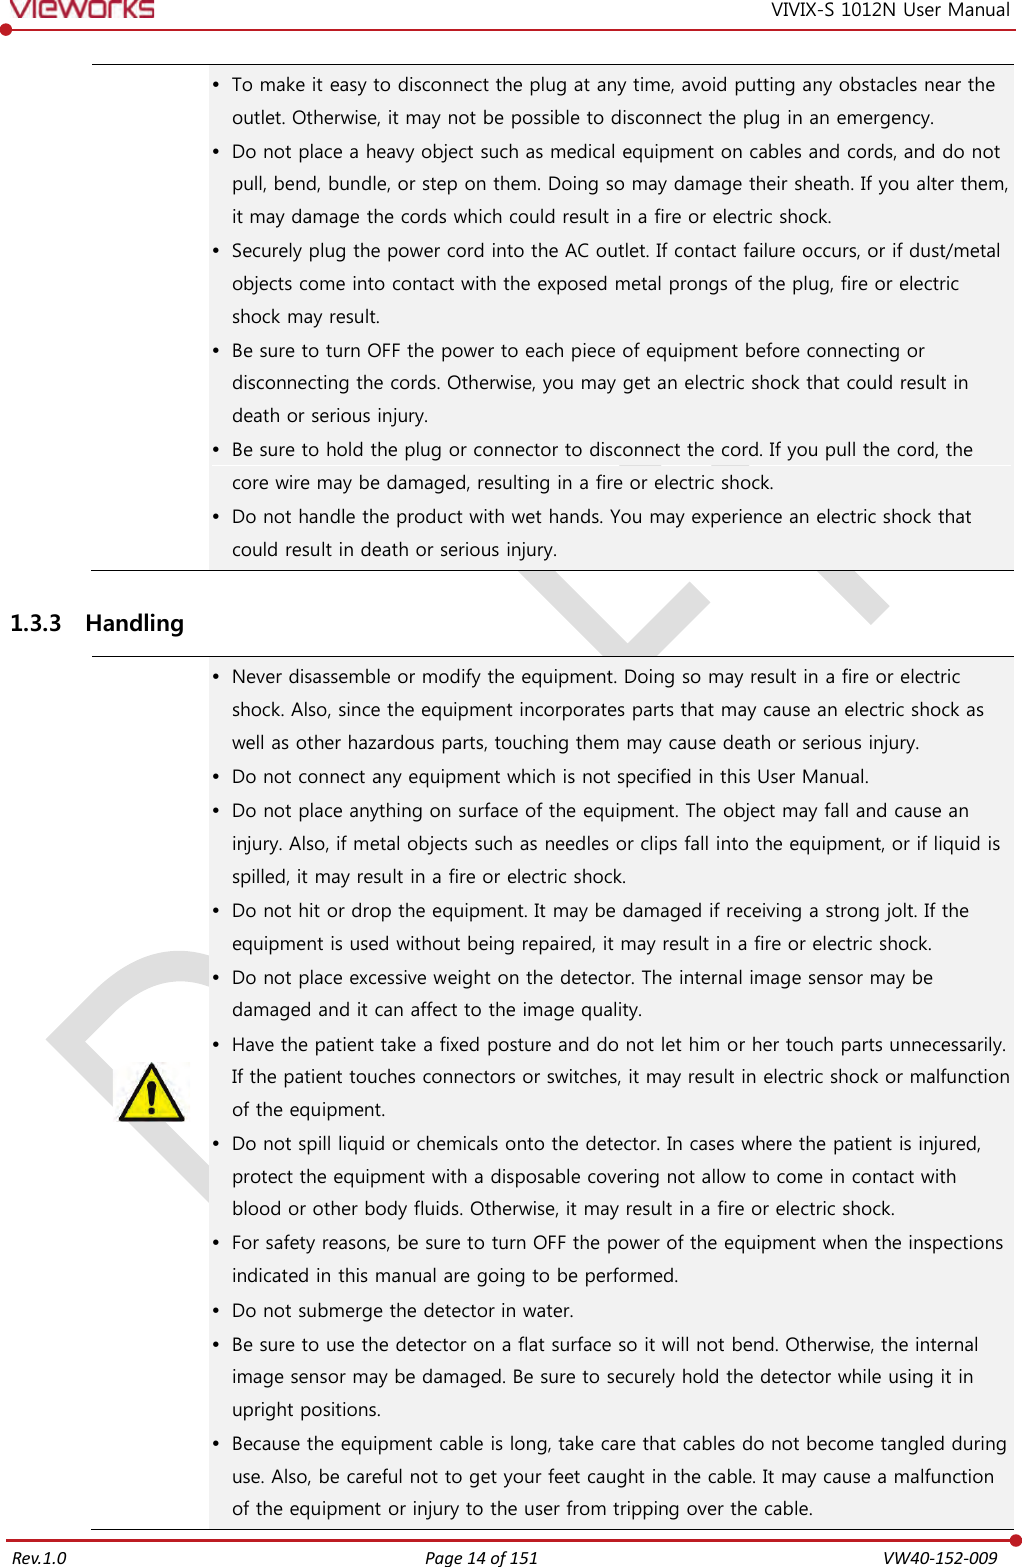   Rev.1.0 Page 14 of 151  VW40-152-009 VIVIX-S 1012N User Manual  To make it easy to disconnect the plug at any time, avoid putting any obstacles near the outlet. Otherwise, it may not be possible to disconnect the plug in an emergency.  Do not place a heavy object such as medical equipment on cables and cords, and do not pull, bend, bundle, or step on them. Doing so may damage their sheath. If you alter them, it may damage the cords which could result in a fire or electric shock.  Securely plug the power cord into the AC outlet. If contact failure occurs, or if dust/metal objects come into contact with the exposed metal prongs of the plug, fire or electric shock may result.  Be sure to turn OFF the power to each piece of equipment before connecting or disconnecting the cords. Otherwise, you may get an electric shock that could result in death or serious injury.  Be sure to hold the plug or connector to disconnect the cord. If you pull the cord, the core wire may be damaged, resulting in a fire or electric shock.  Do not handle the product with wet hands. You may experience an electric shock that could result in death or serious injury. 1.3.3 Handling   Never disassemble or modify the equipment. Doing so may result in a fire or electric shock. Also, since the equipment incorporates parts that may cause an electric shock as well as other hazardous parts, touching them may cause death or serious injury.  Do not connect any equipment which is not specified in this User Manual.  Do not place anything on surface of the equipment. The object may fall and cause an injury. Also, if metal objects such as needles or clips fall into the equipment, or if liquid is spilled, it may result in a fire or electric shock.  Do not hit or drop the equipment. It may be damaged if receiving a strong jolt. If the equipment is used without being repaired, it may result in a fire or electric shock.  Do not place excessive weight on the detector. The internal image sensor may be damaged and it can affect to the image quality.  Have the patient take a fixed posture and do not let him or her touch parts unnecessarily. If the patient touches connectors or switches, it may result in electric shock or malfunction of the equipment.  Do not spill liquid or chemicals onto the detector. In cases where the patient is injured, protect the equipment with a disposable covering not allow to come in contact with blood or other body fluids. Otherwise, it may result in a fire or electric shock.  For safety reasons, be sure to turn OFF the power of the equipment when the inspections indicated in this manual are going to be performed.  Do not submerge the detector in water.  Be sure to use the detector on a flat surface so it will not bend. Otherwise, the internal image sensor may be damaged. Be sure to securely hold the detector while using it in upright positions.  Because the equipment cable is long, take care that cables do not become tangled during use. Also, be careful not to get your feet caught in the cable. It may cause a malfunction of the equipment or injury to the user from tripping over the cable. 